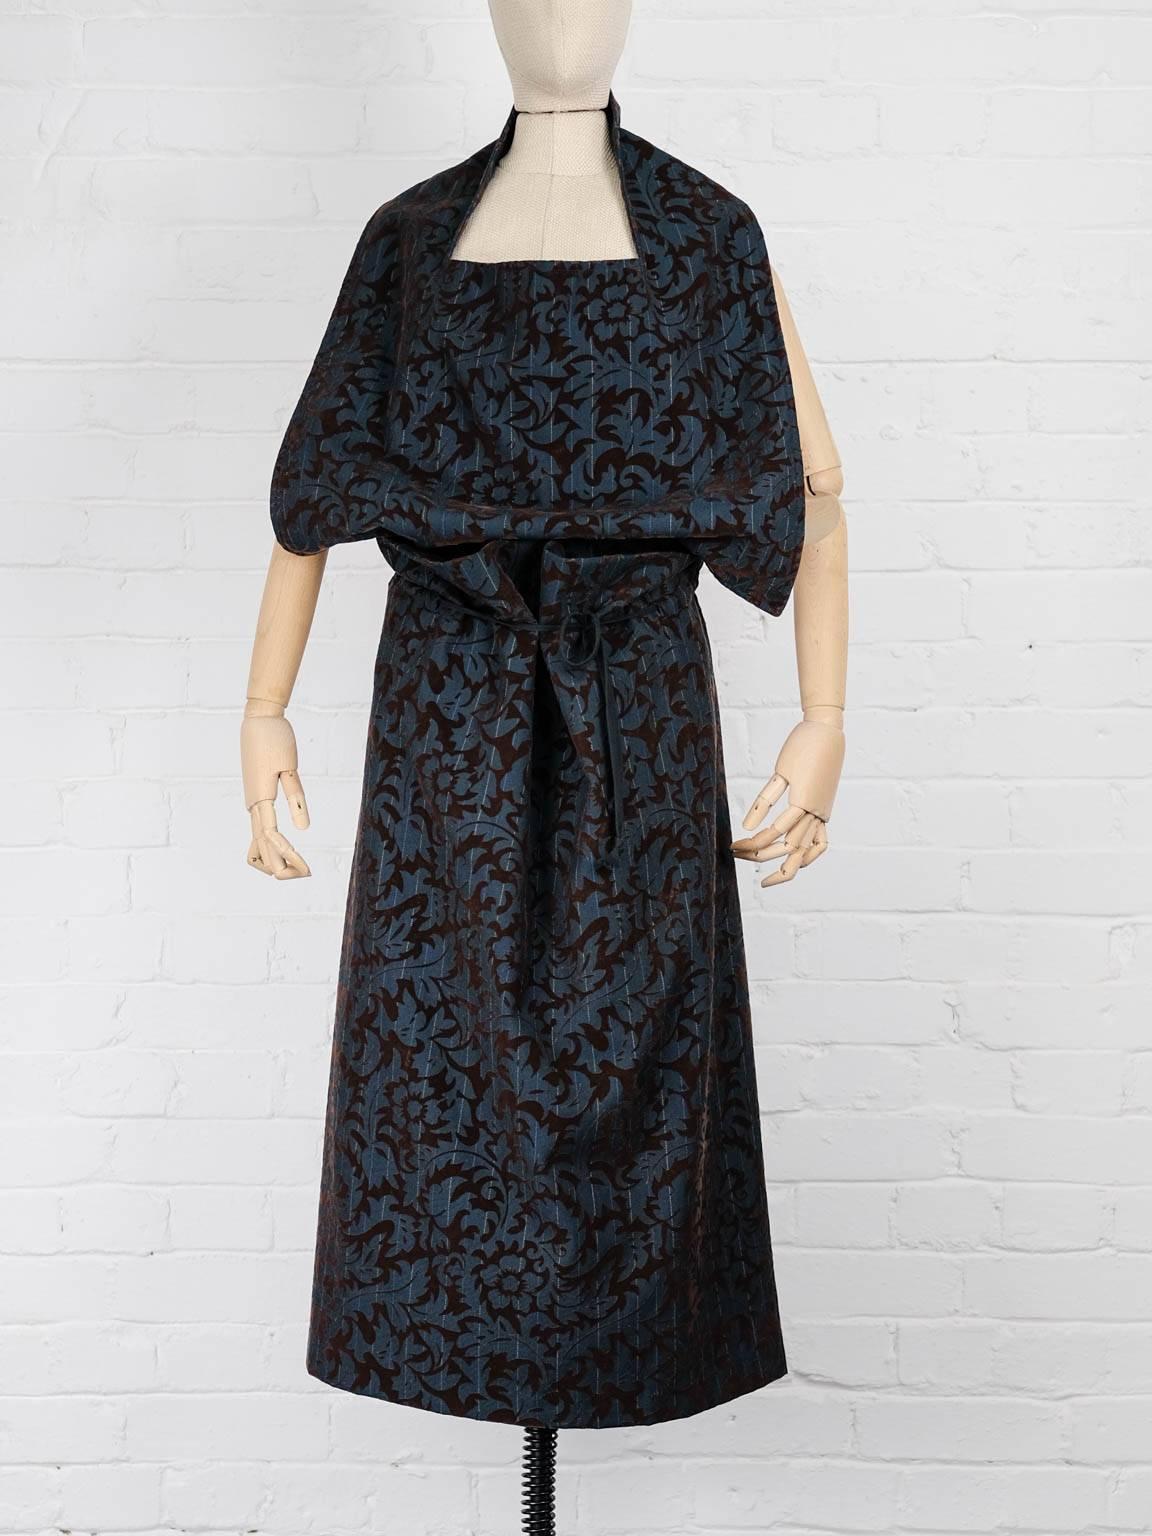 1996 Blue wool floral flock halterneck dress,  featuring an open back, a back tie fastening, a mid-calf length, a sleeveless design, a draped design, an elasticated waistband with a drawstring fastening and a contrasting floral flock print.

Total